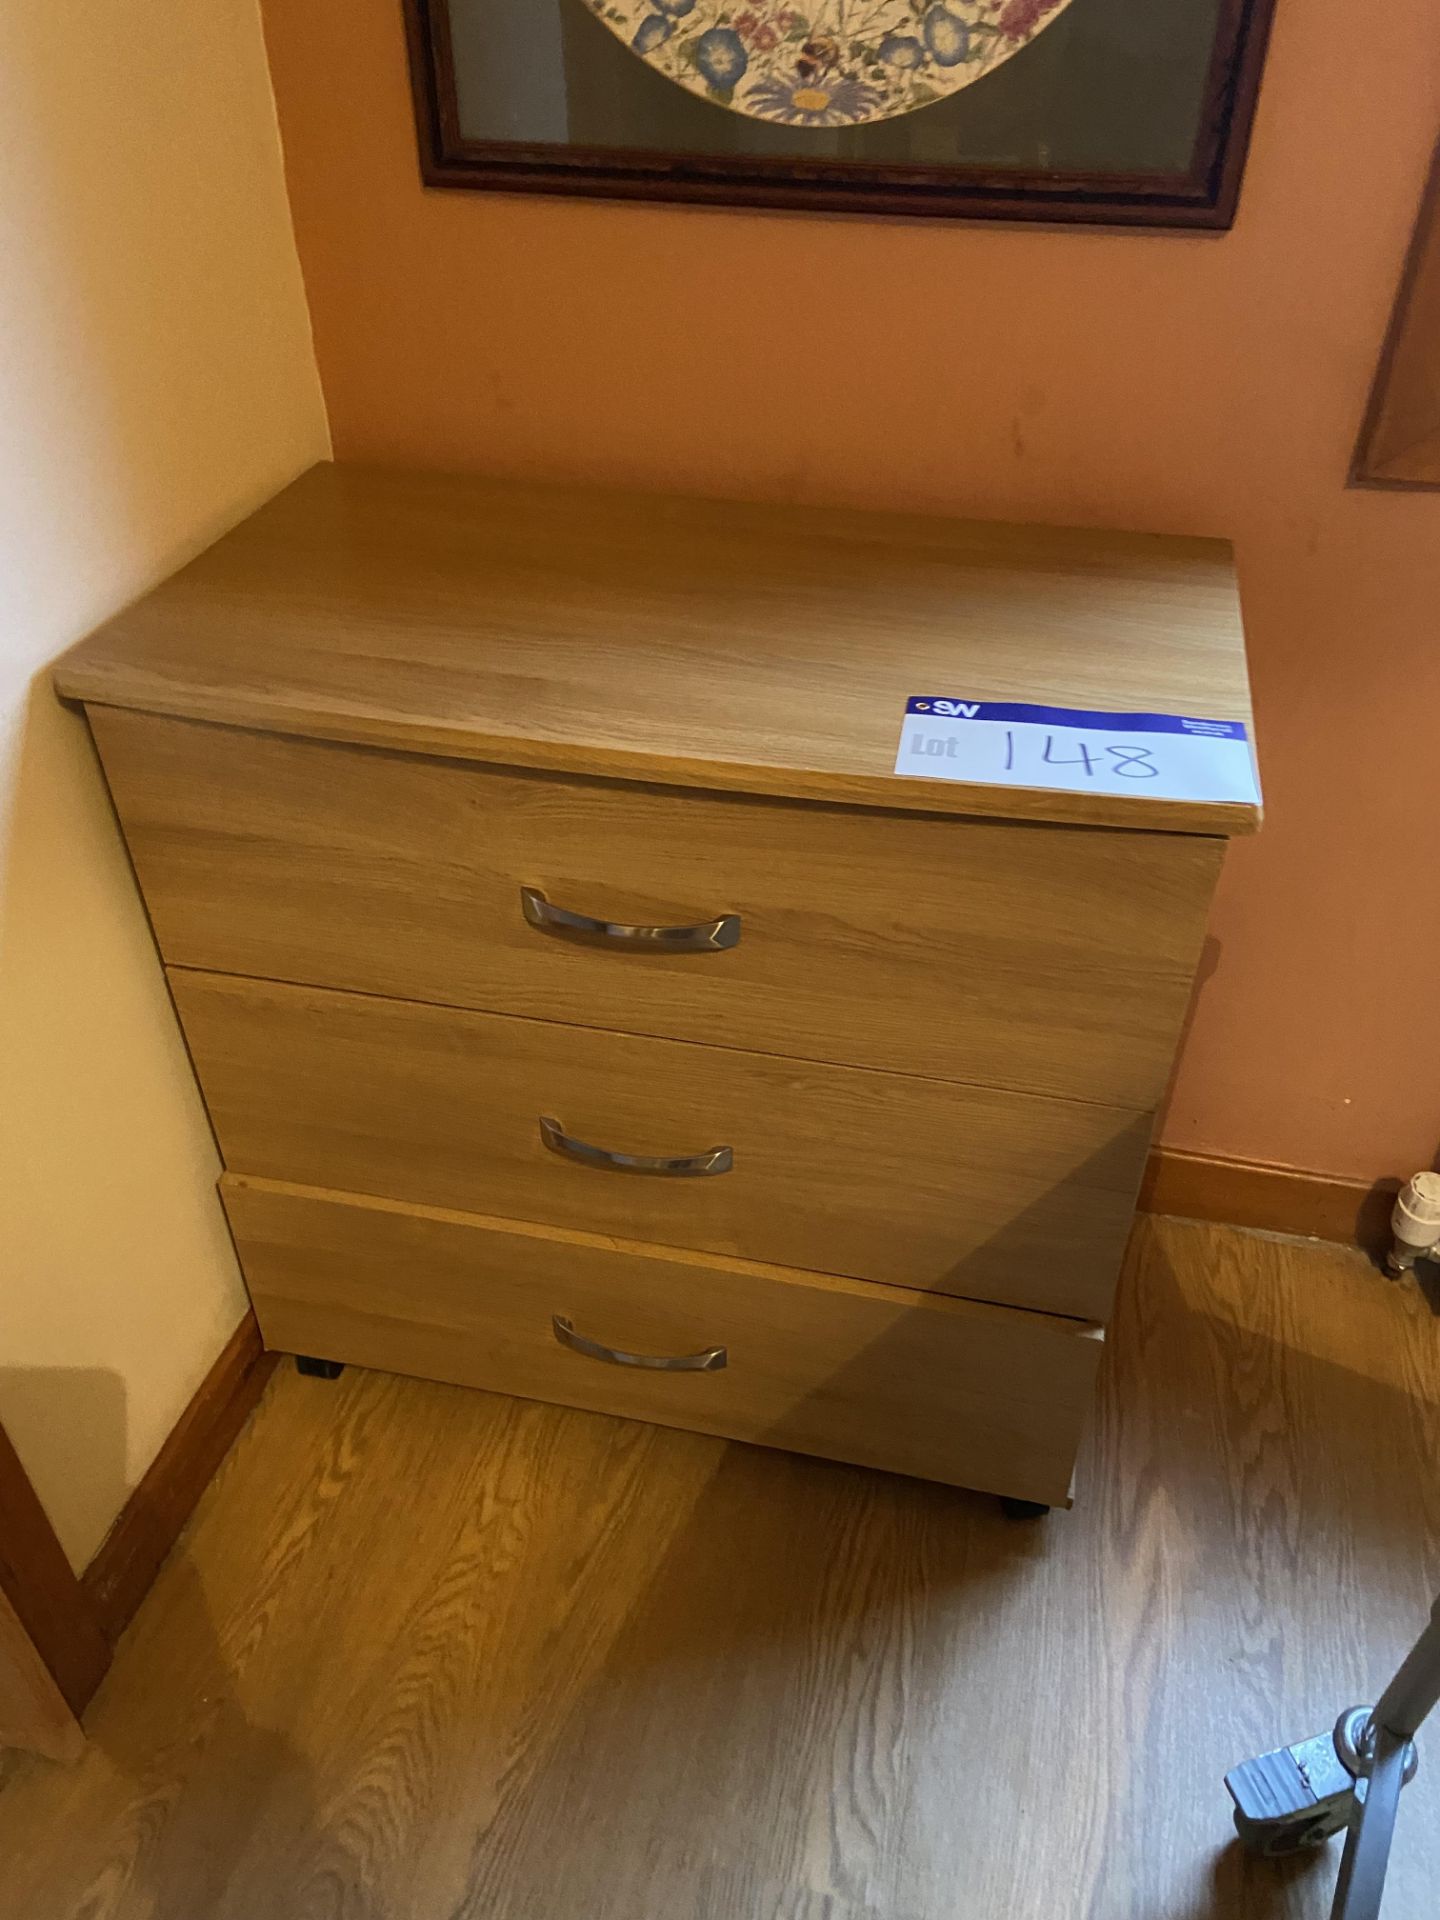 Remaining Bedroom Furniture, including oak laminated wardrobe, three drawer chest-of-drawers, - Image 2 of 3